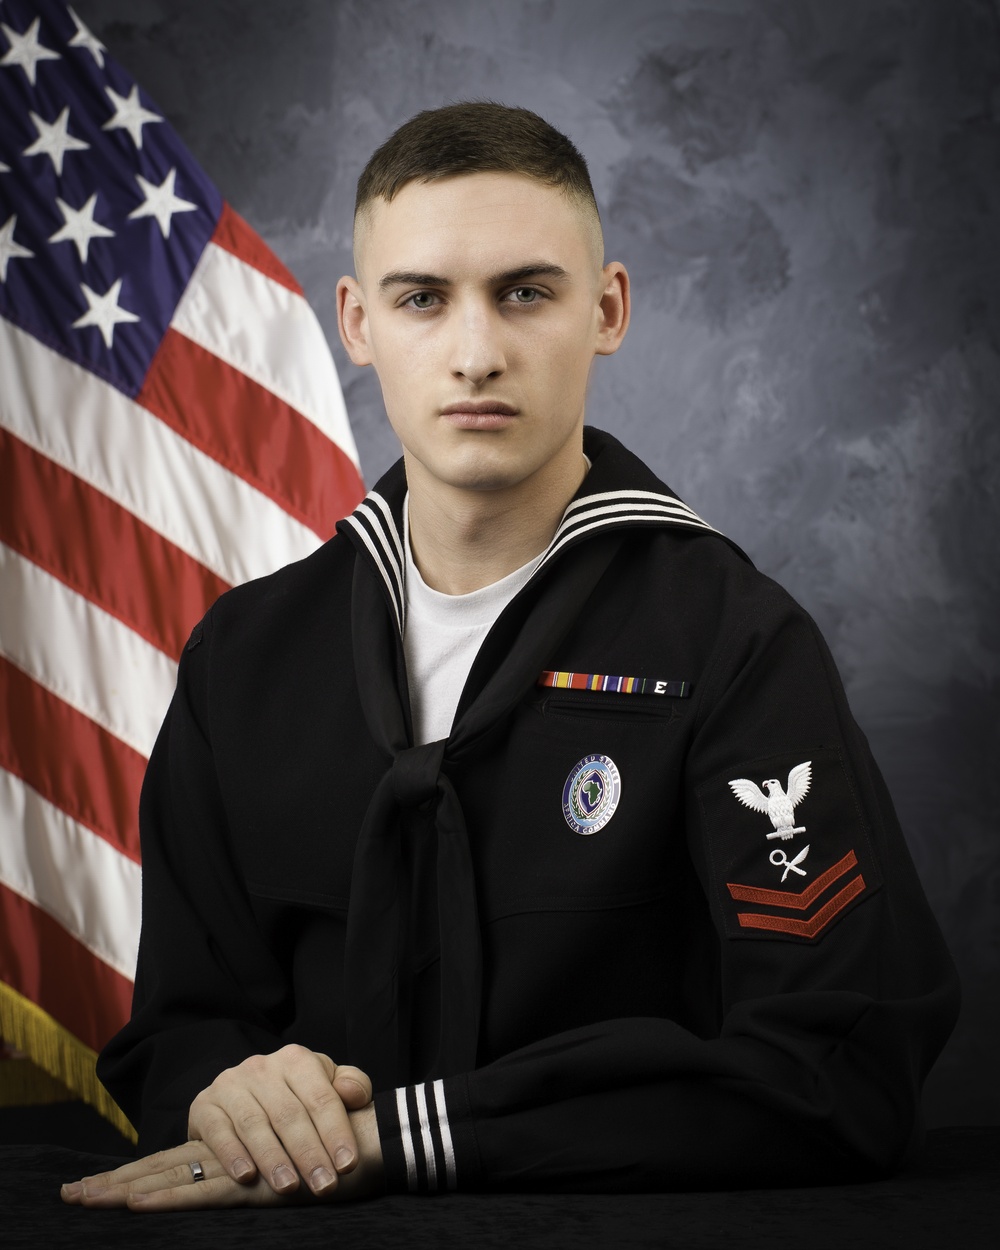 Official portrait, Intelligence Specialist 2nd Class Kenneth D. Stewart, United States Naval Reserve